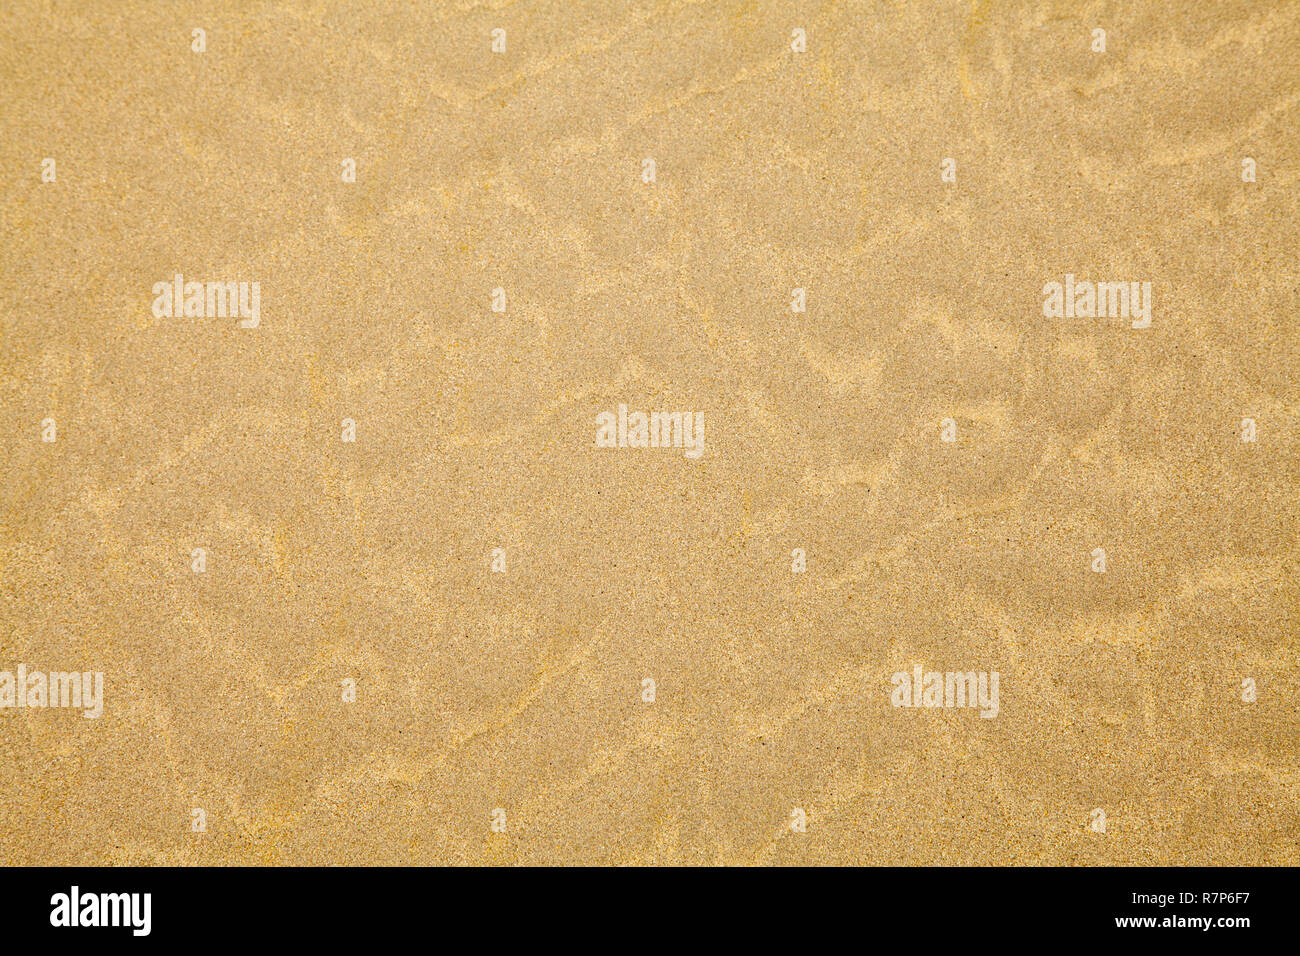 Tan Beach Sand With Ripple Pattern Background. Stock Photo